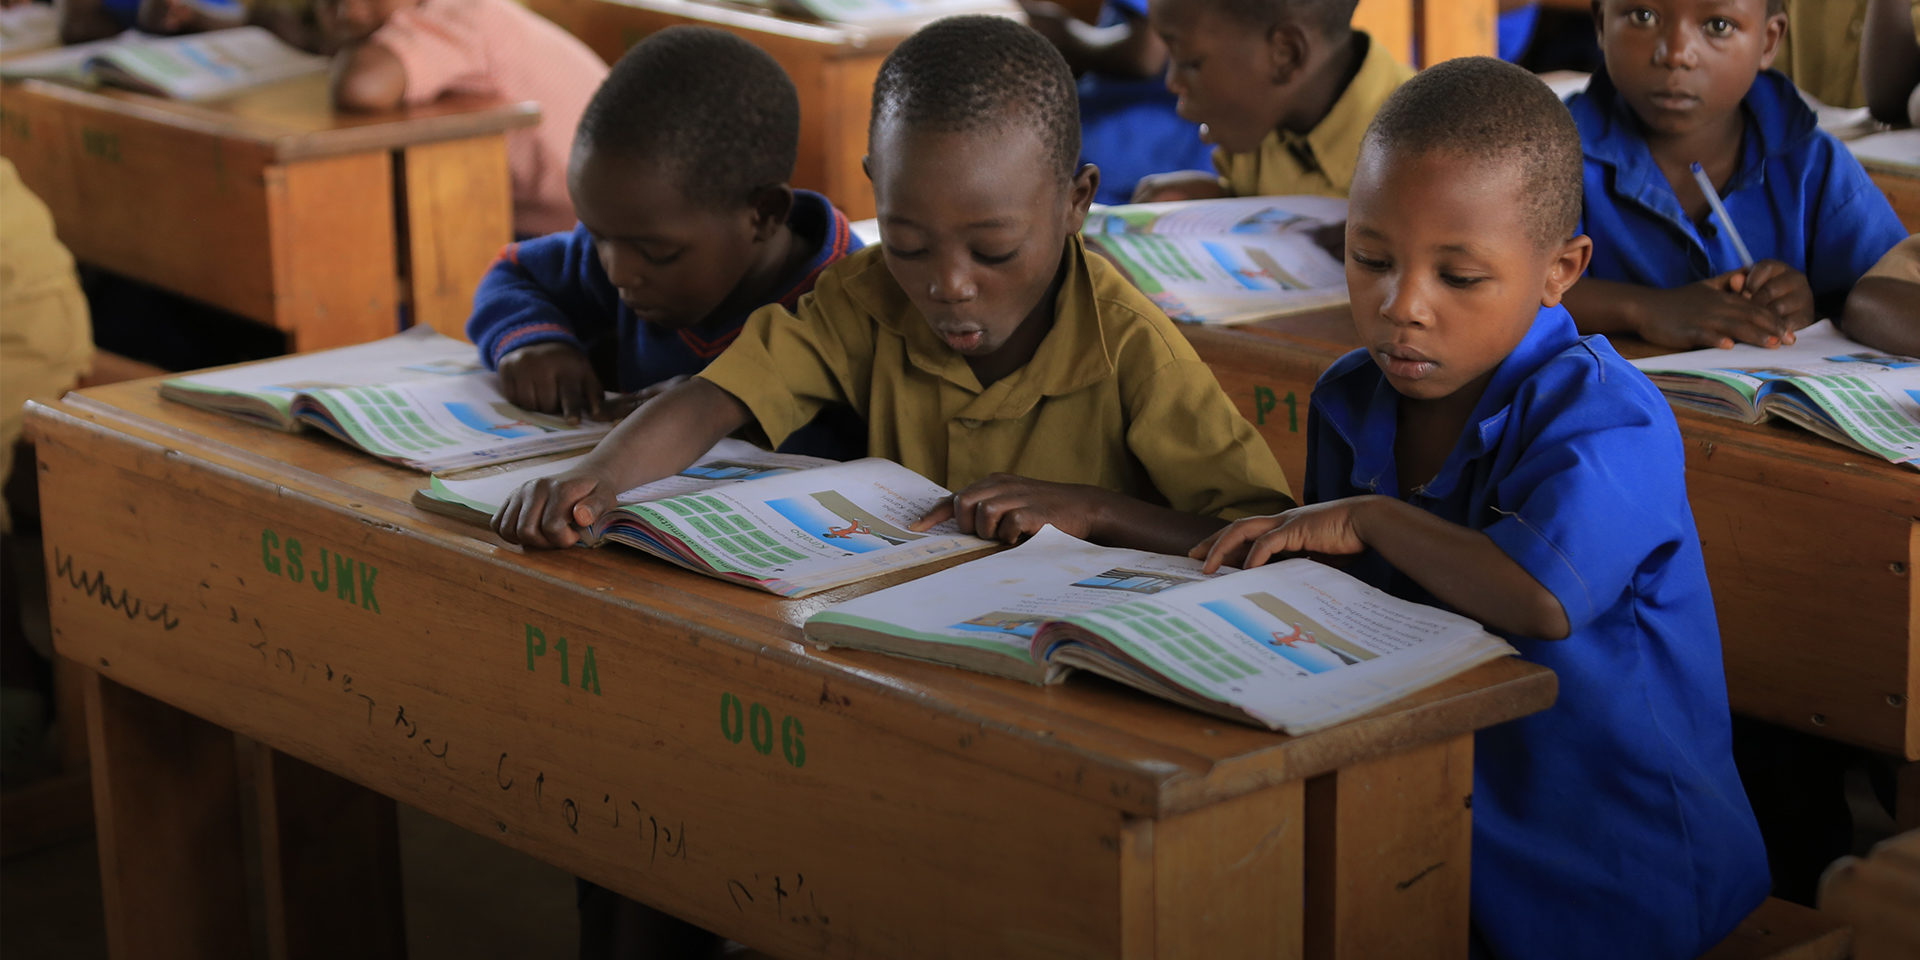 Three children sitting at a school desk and reading from individual books.